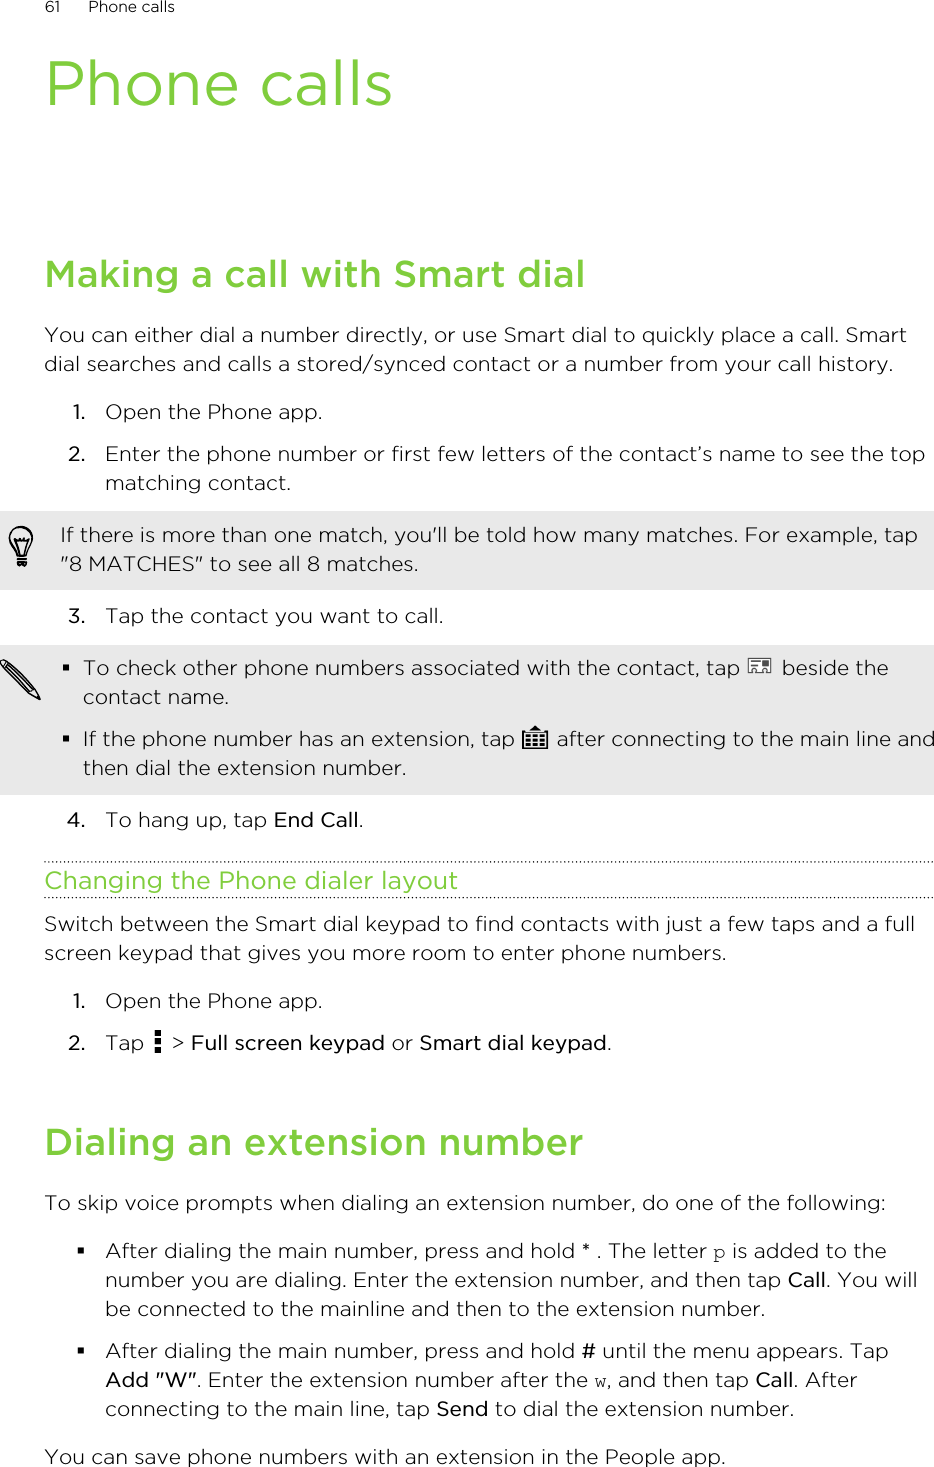 Phone callsMaking a call with Smart dialYou can either dial a number directly, or use Smart dial to quickly place a call. Smartdial searches and calls a stored/synced contact or a number from your call history.1. Open the Phone app.2. Enter the phone number or first few letters of the contact’s name to see the topmatching contact. If there is more than one match, you&apos;ll be told how many matches. For example, tap&quot;8 MATCHES&quot; to see all 8 matches.3. Tap the contact you want to call. §To check other phone numbers associated with the contact, tap   beside thecontact name.§If the phone number has an extension, tap   after connecting to the main line andthen dial the extension number.4. To hang up, tap End Call.Changing the Phone dialer layoutSwitch between the Smart dial keypad to find contacts with just a few taps and a fullscreen keypad that gives you more room to enter phone numbers.1. Open the Phone app.2. Tap   &gt; Full screen keypad or Smart dial keypad.Dialing an extension numberTo skip voice prompts when dialing an extension number, do one of the following:§After dialing the main number, press and hold * . The letter p is added to thenumber you are dialing. Enter the extension number, and then tap Call. You willbe connected to the mainline and then to the extension number.§After dialing the main number, press and hold # until the menu appears. TapAdd &quot;W&quot;. Enter the extension number after the w, and then tap Call. Afterconnecting to the main line, tap Send to dial the extension number.You can save phone numbers with an extension in the People app.61 Phone calls